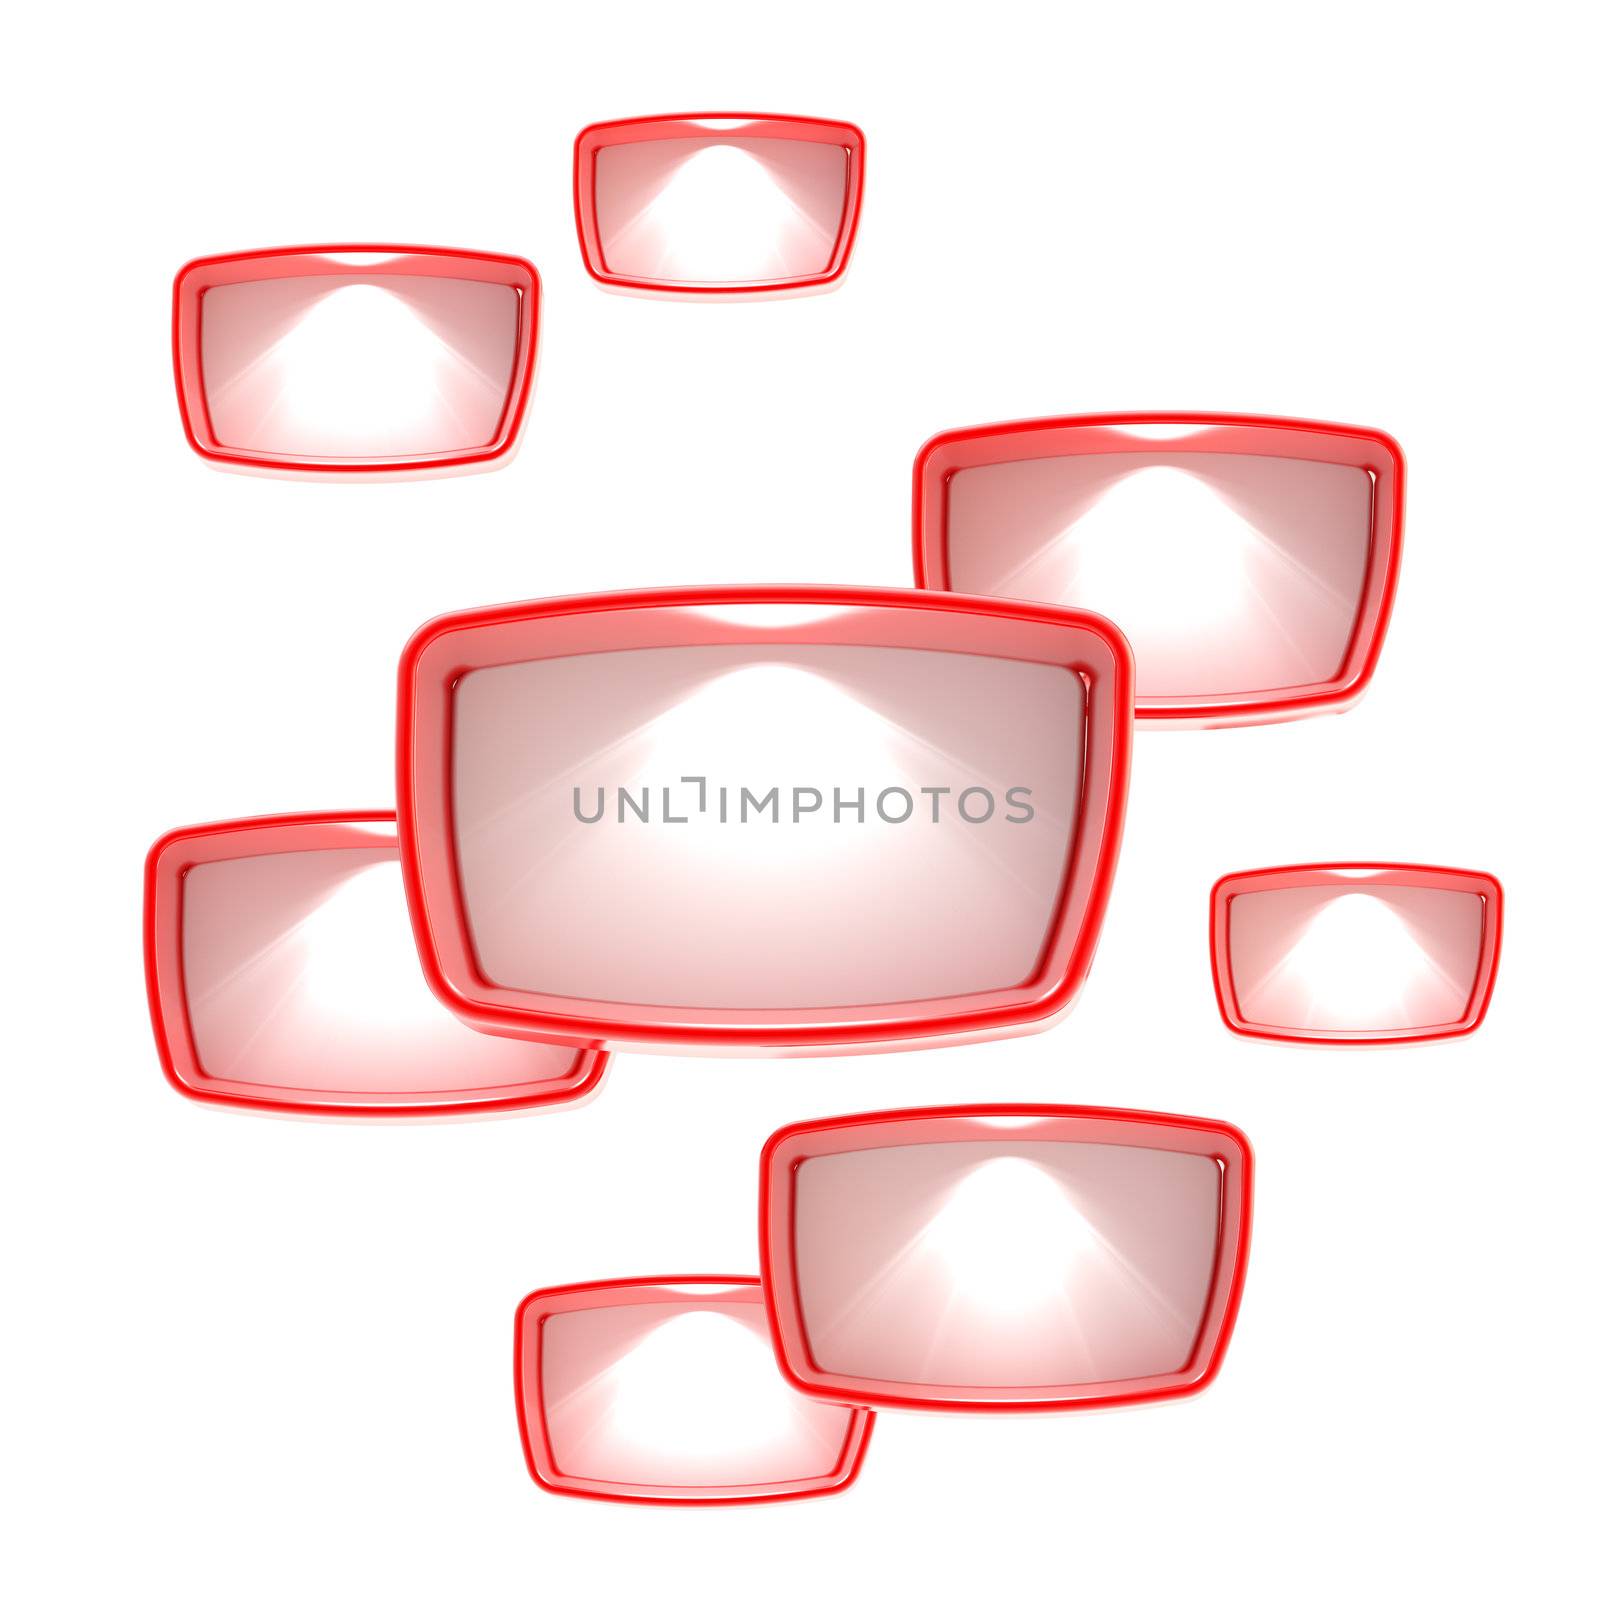 Copyspace template background made of red light boxes isolated on white